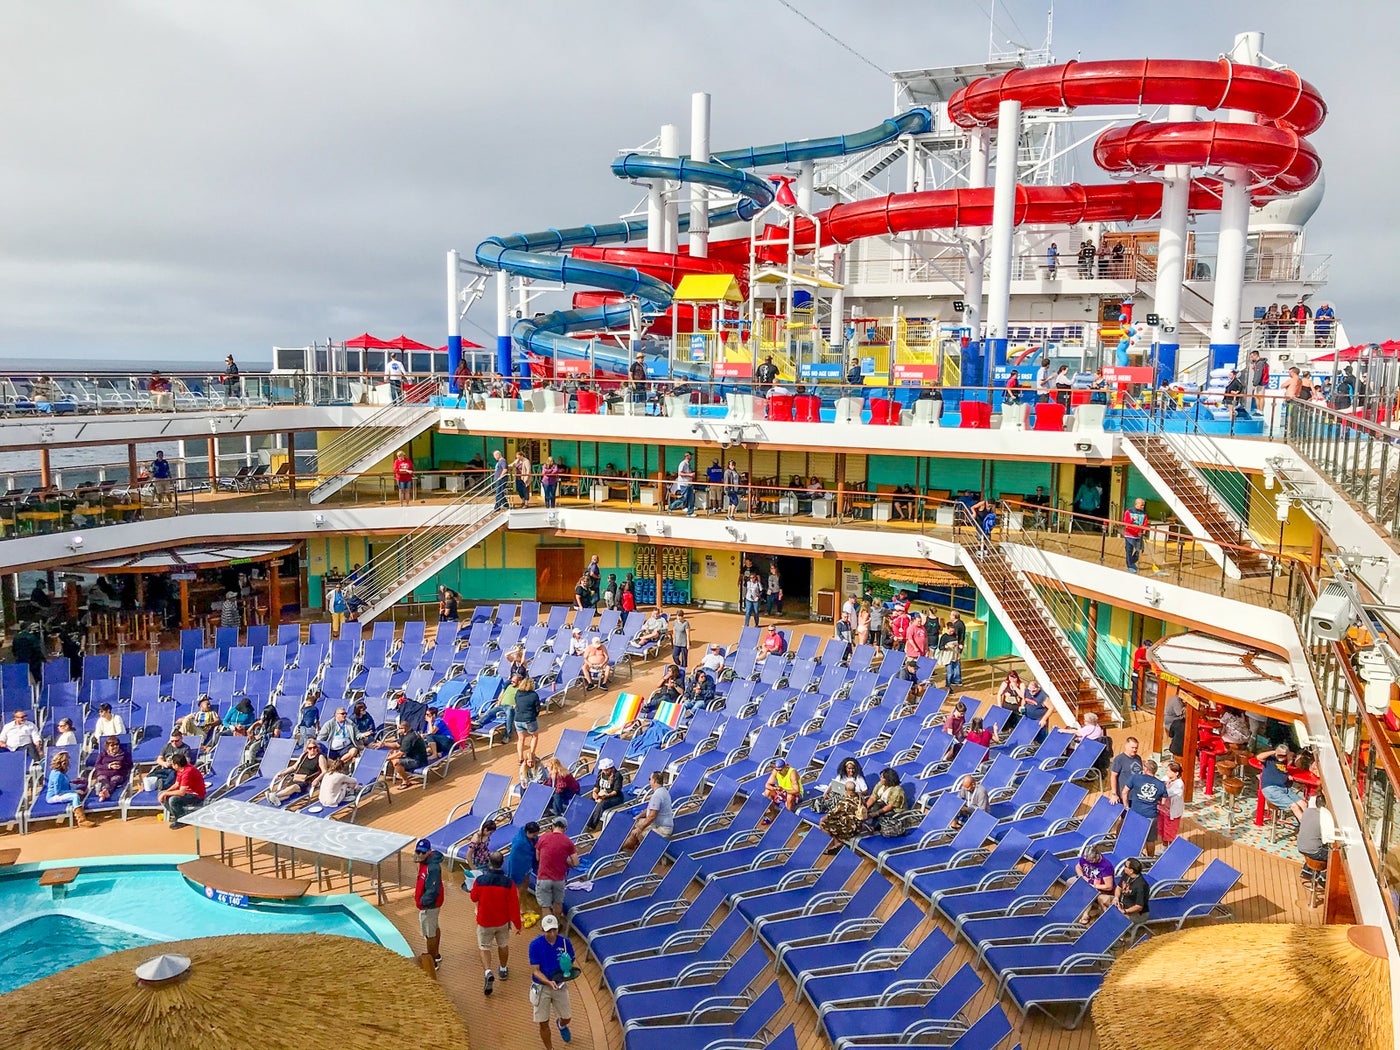 what's on carnival cruise